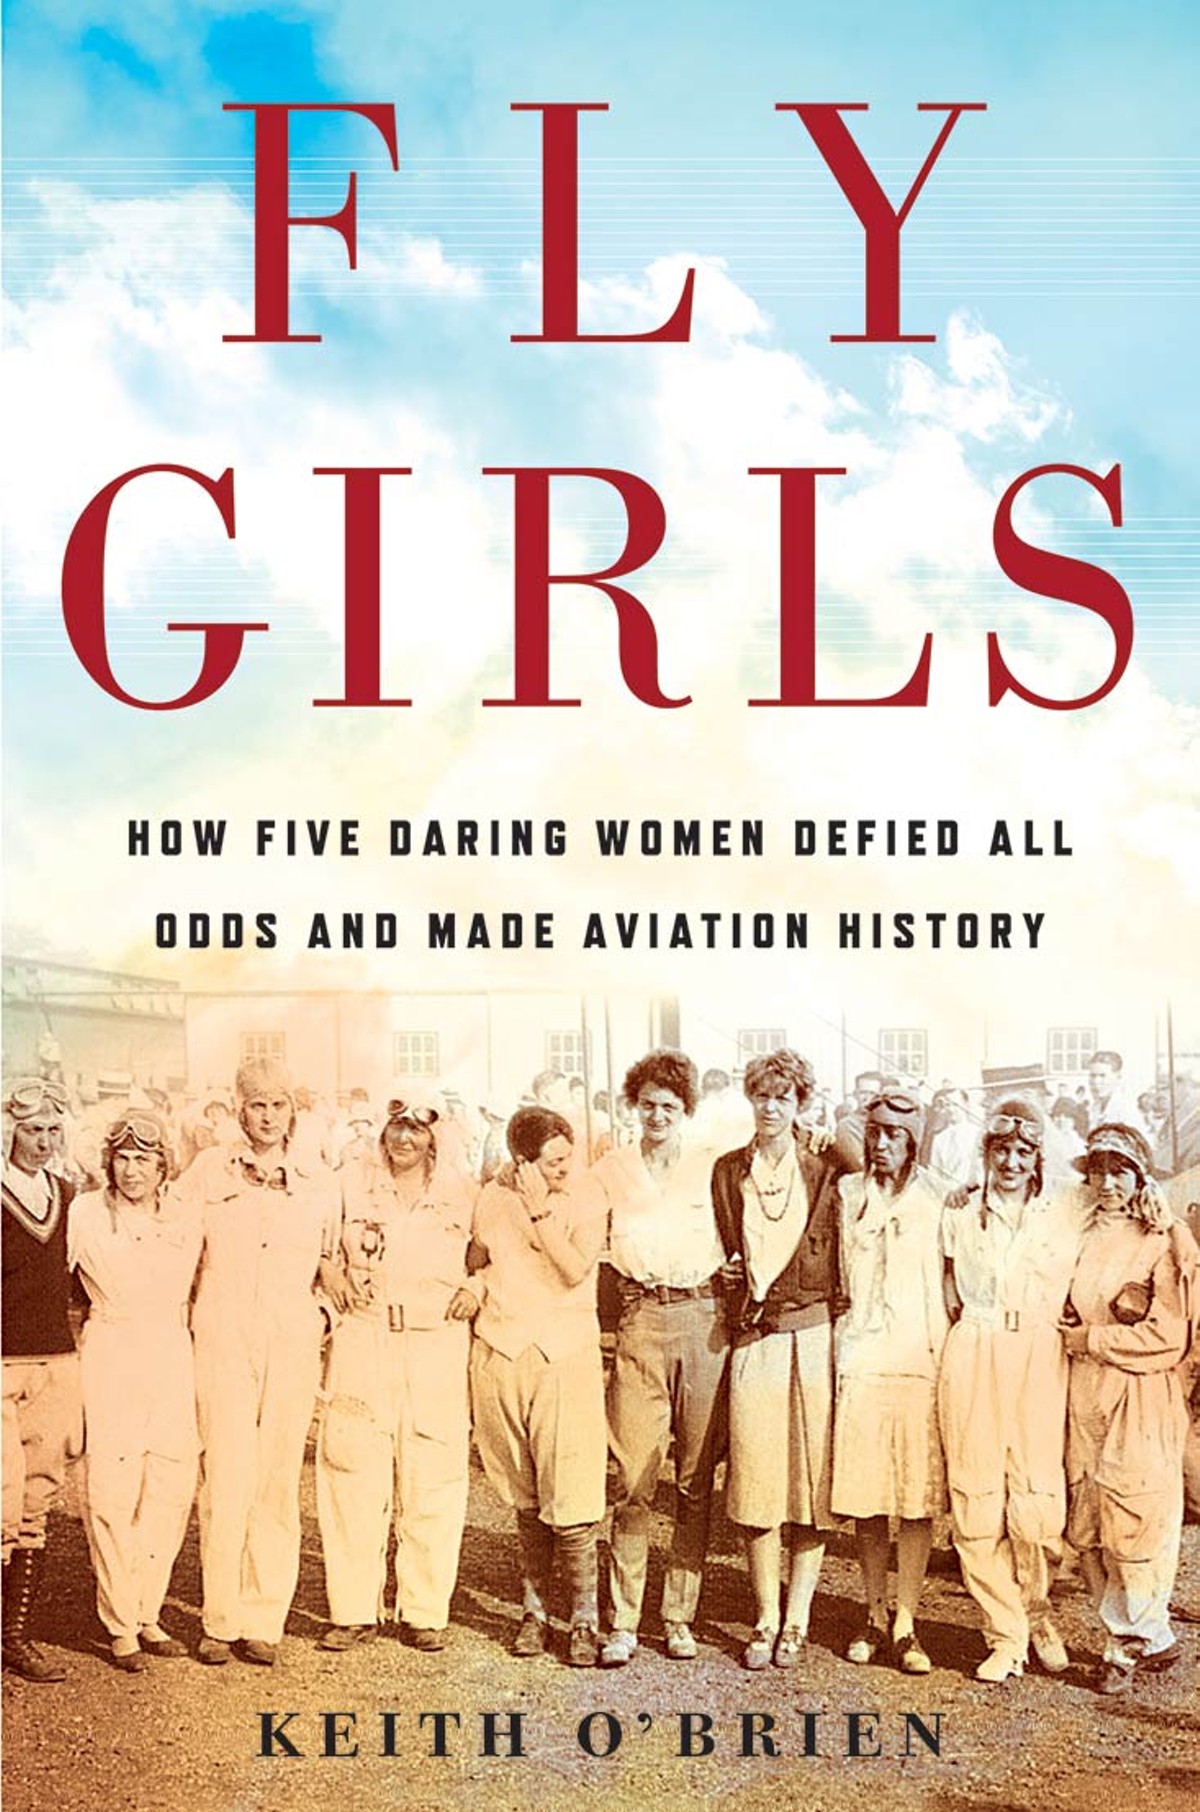 Book Review: 'Fly Girls' Profiles Women who Tamed the Skies